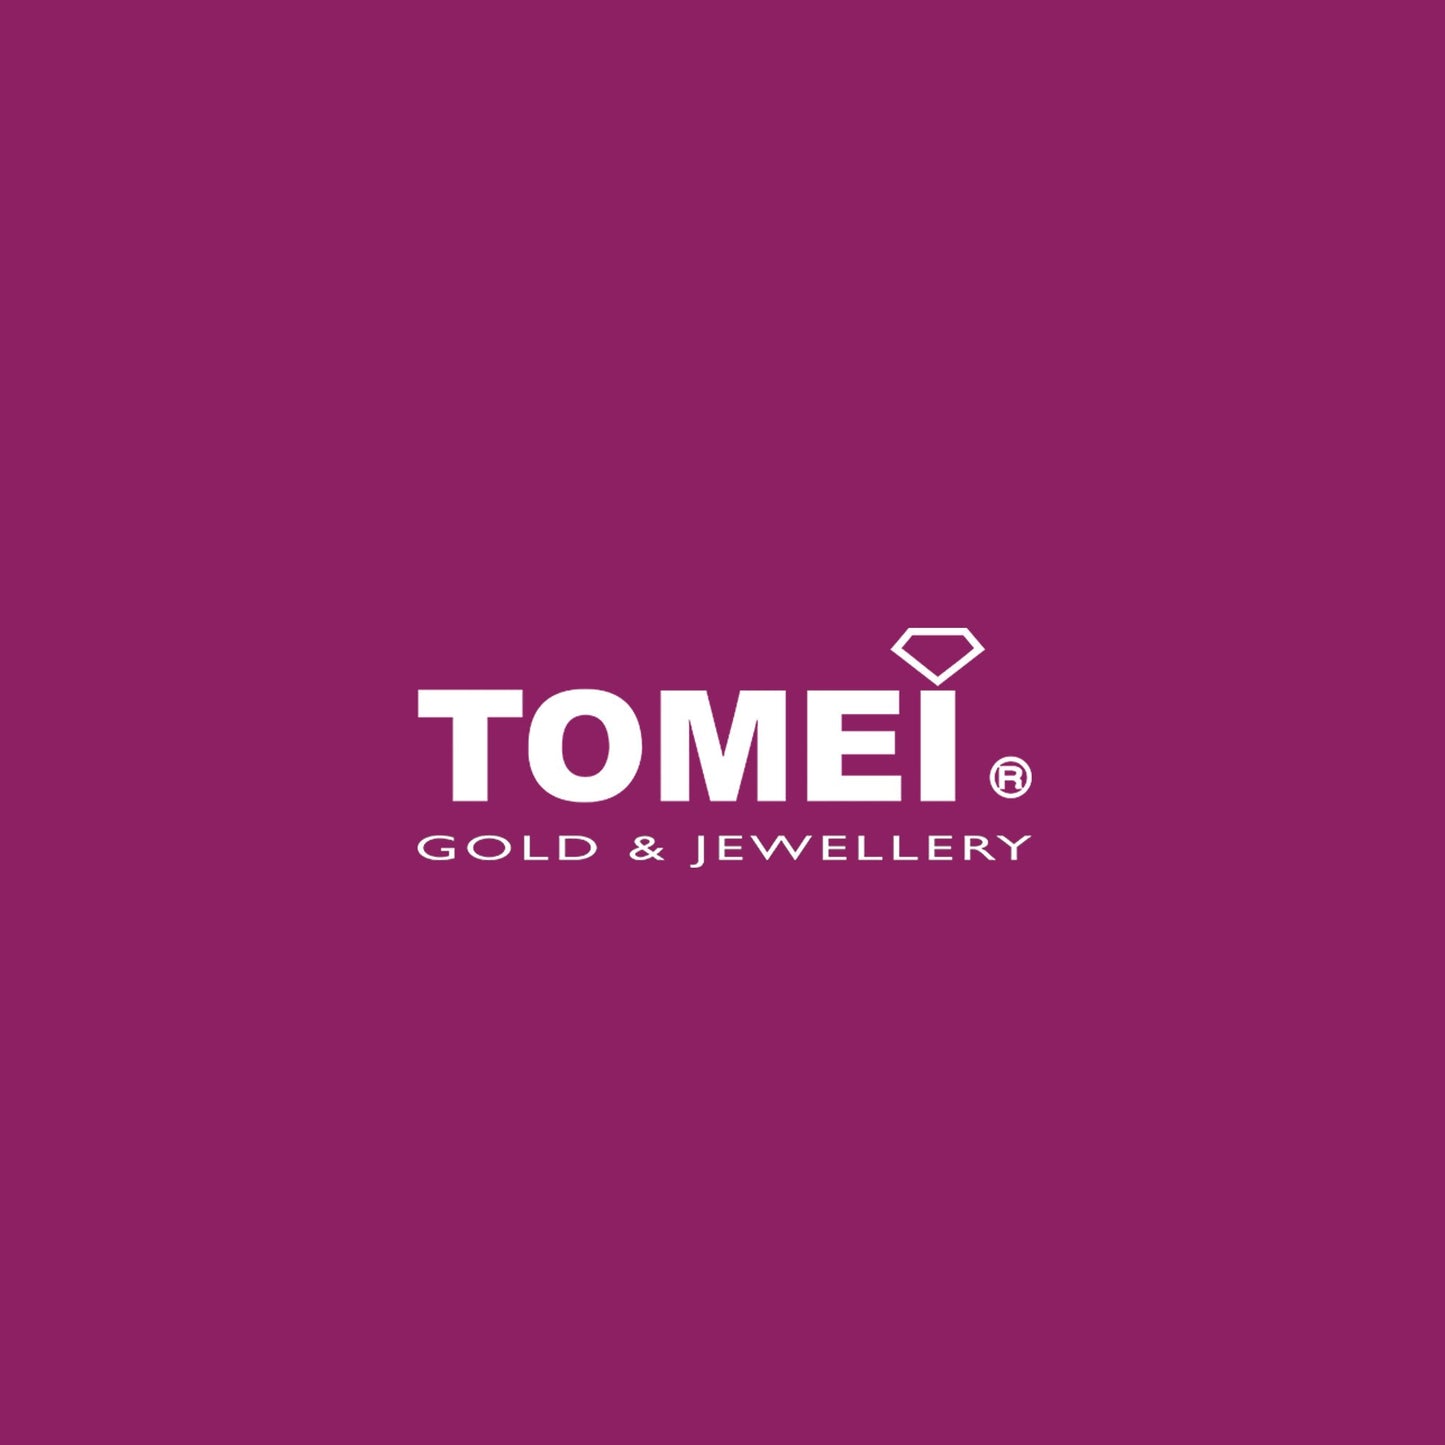 TOMEI Abacus & Money Bag Bracelet, Yellow Gold 916